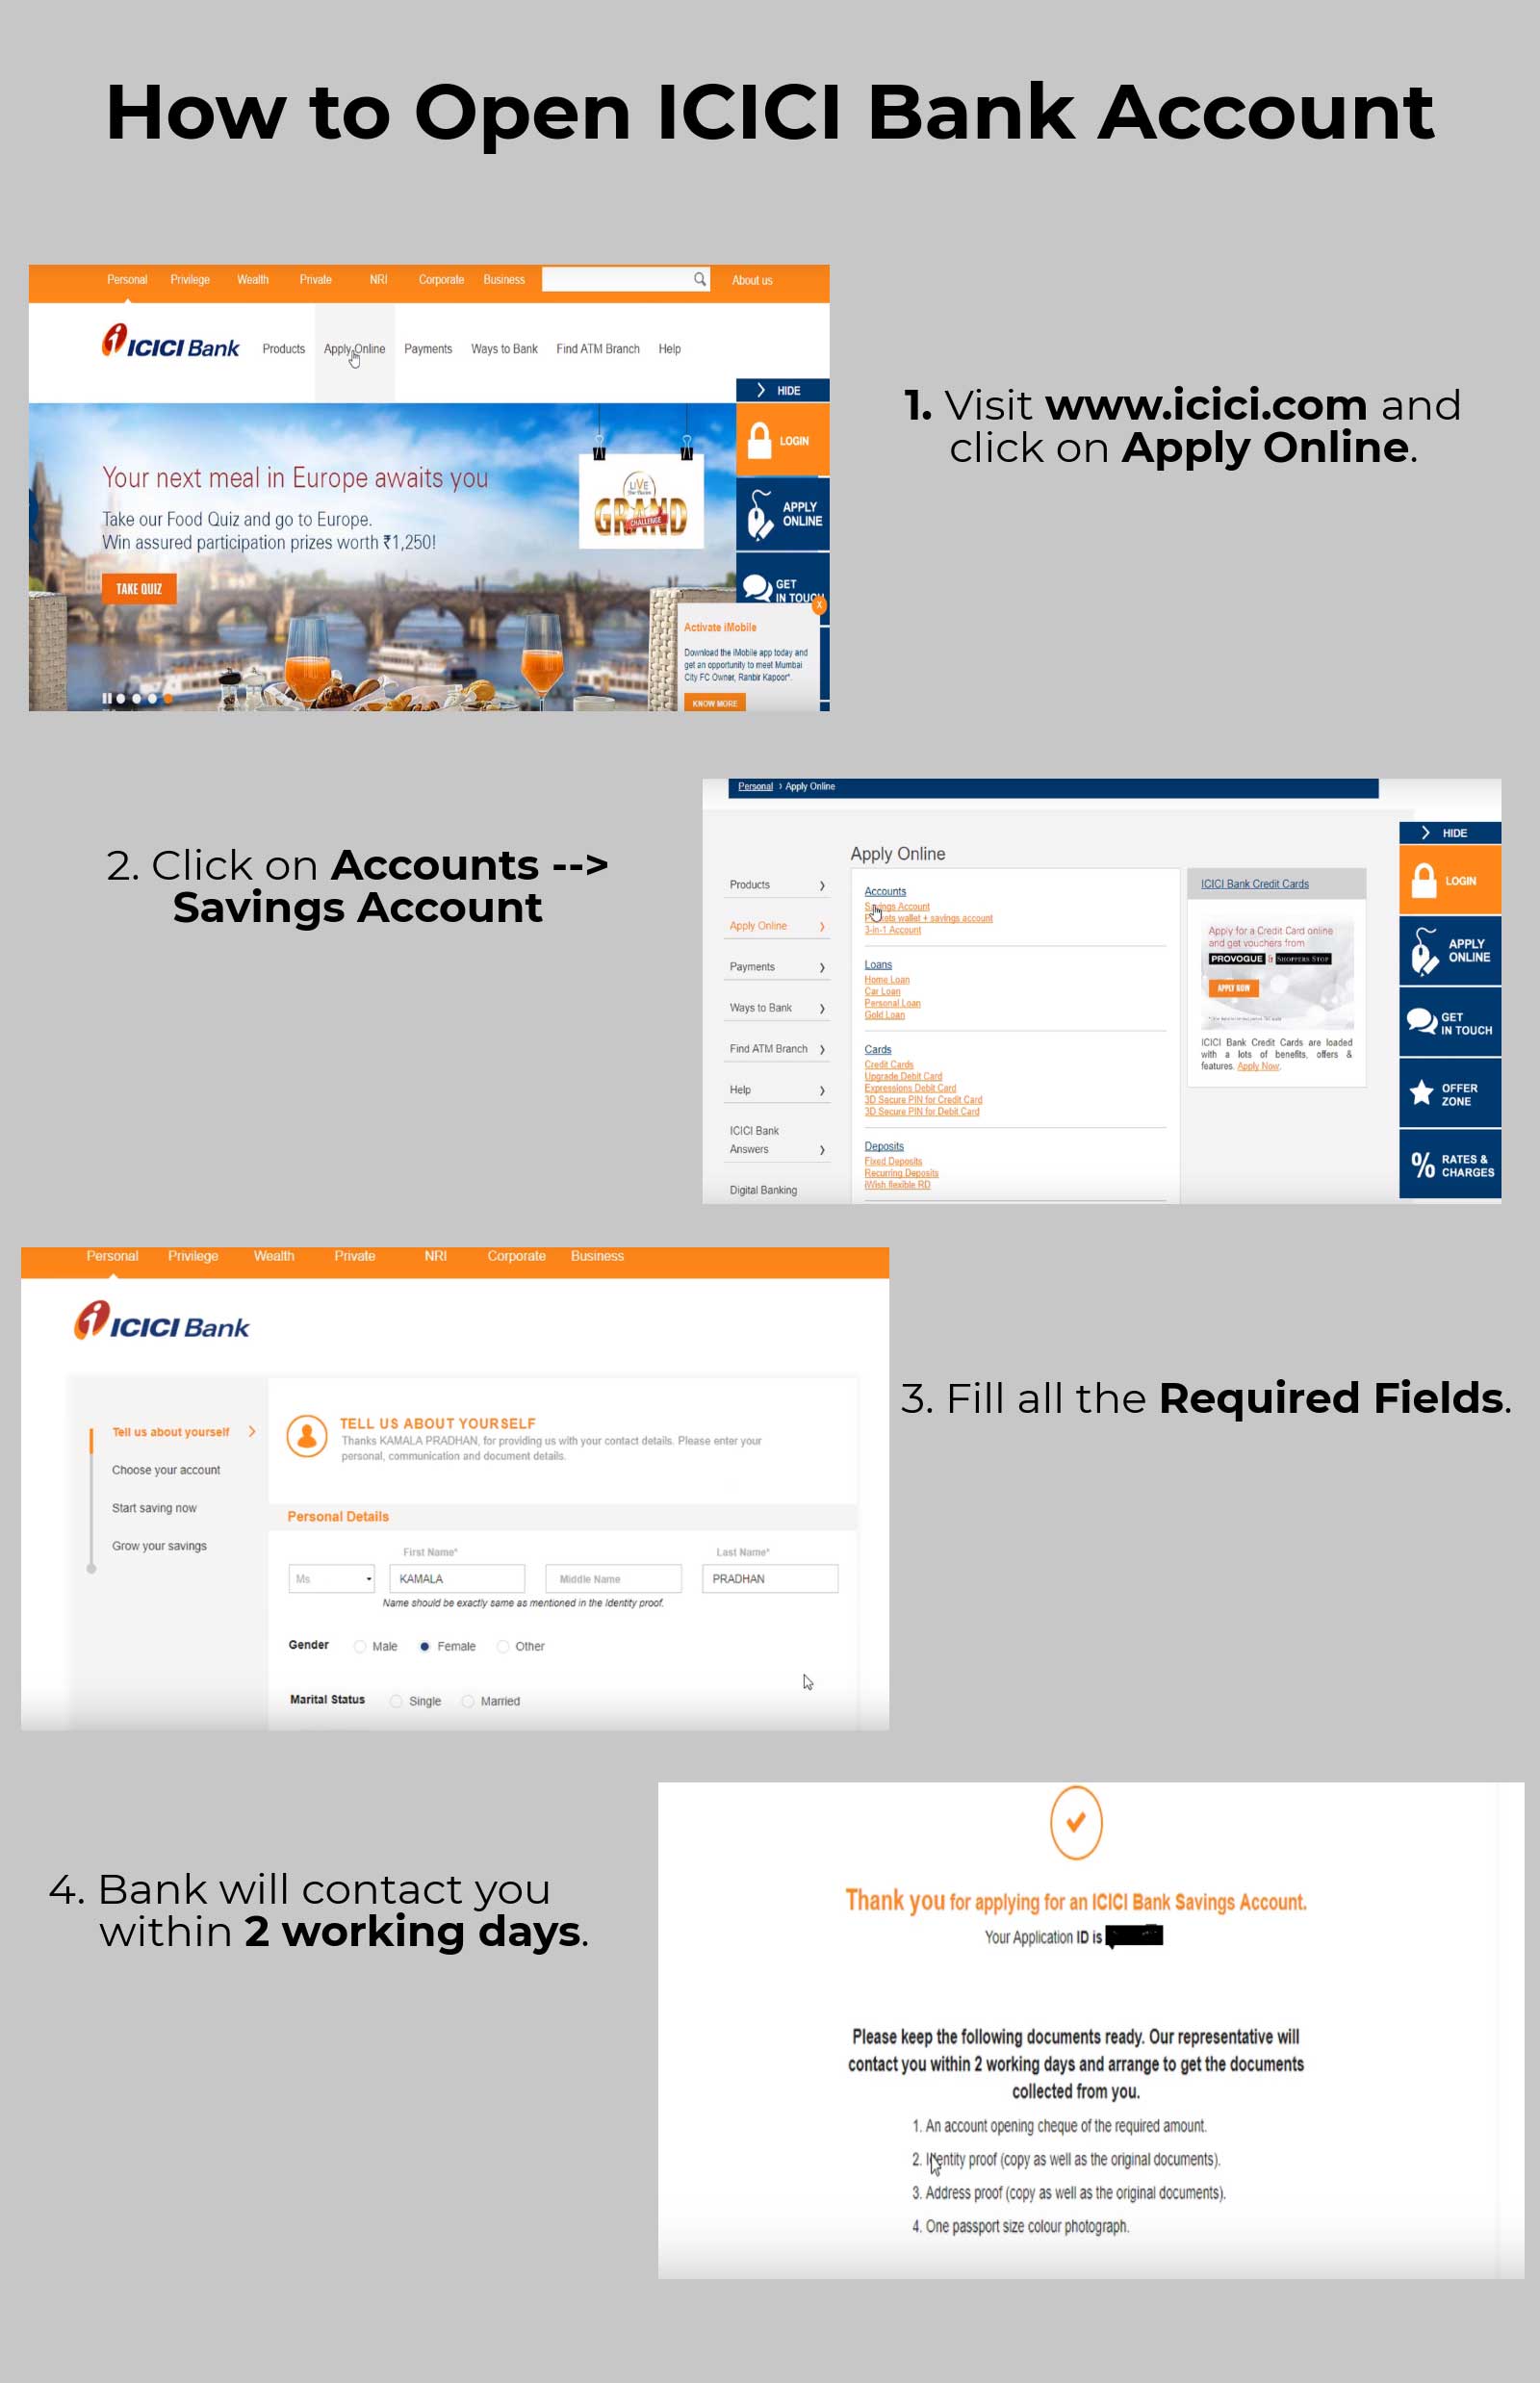 
                    1.  Visit www.icici.com and click on Apply Online.
                    2.  Click on Accounts --> Savings Account.
                    3.  Fill all the Required Fields.
                    4.  Bank will contact you within 2 working days.
                    